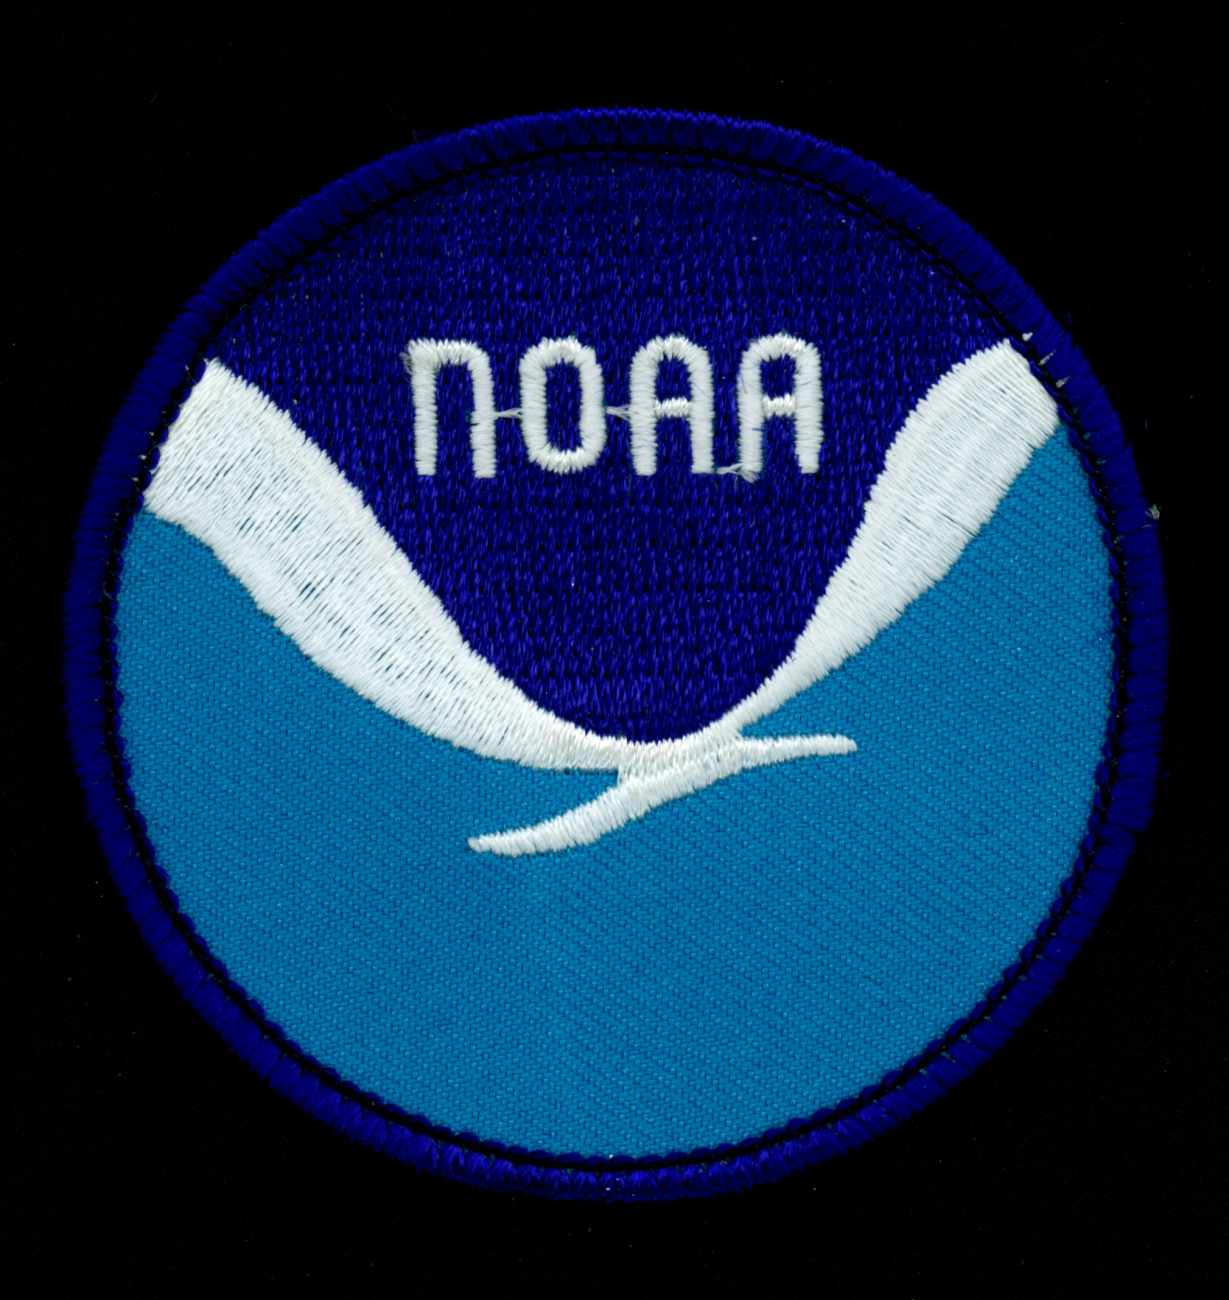 Patch showing the official emblem of the National Oceanic and AtmosphericAdministration